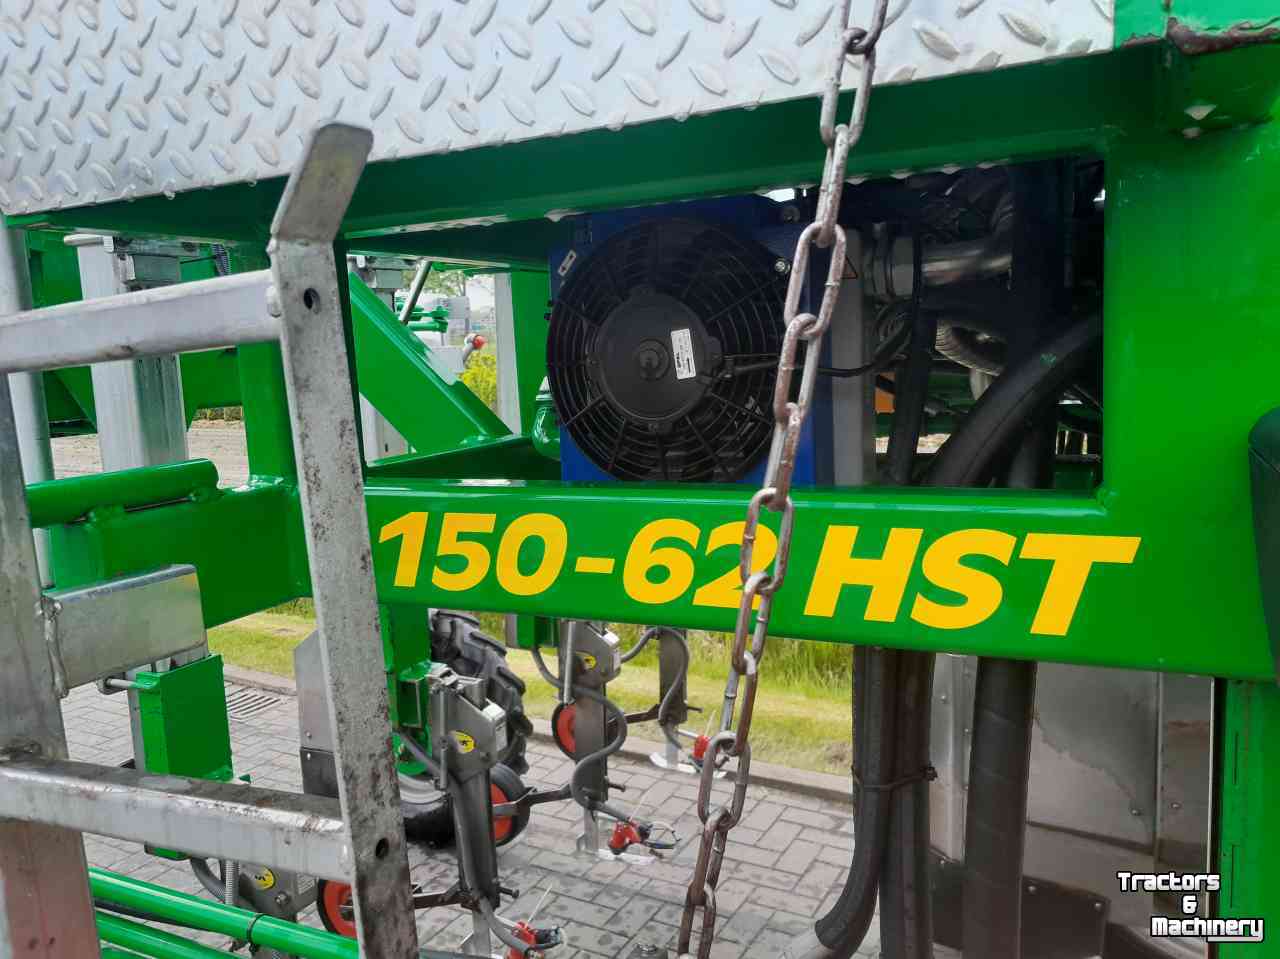 Horticultural Tractors  SMA 150-62 HST Tool Carrier